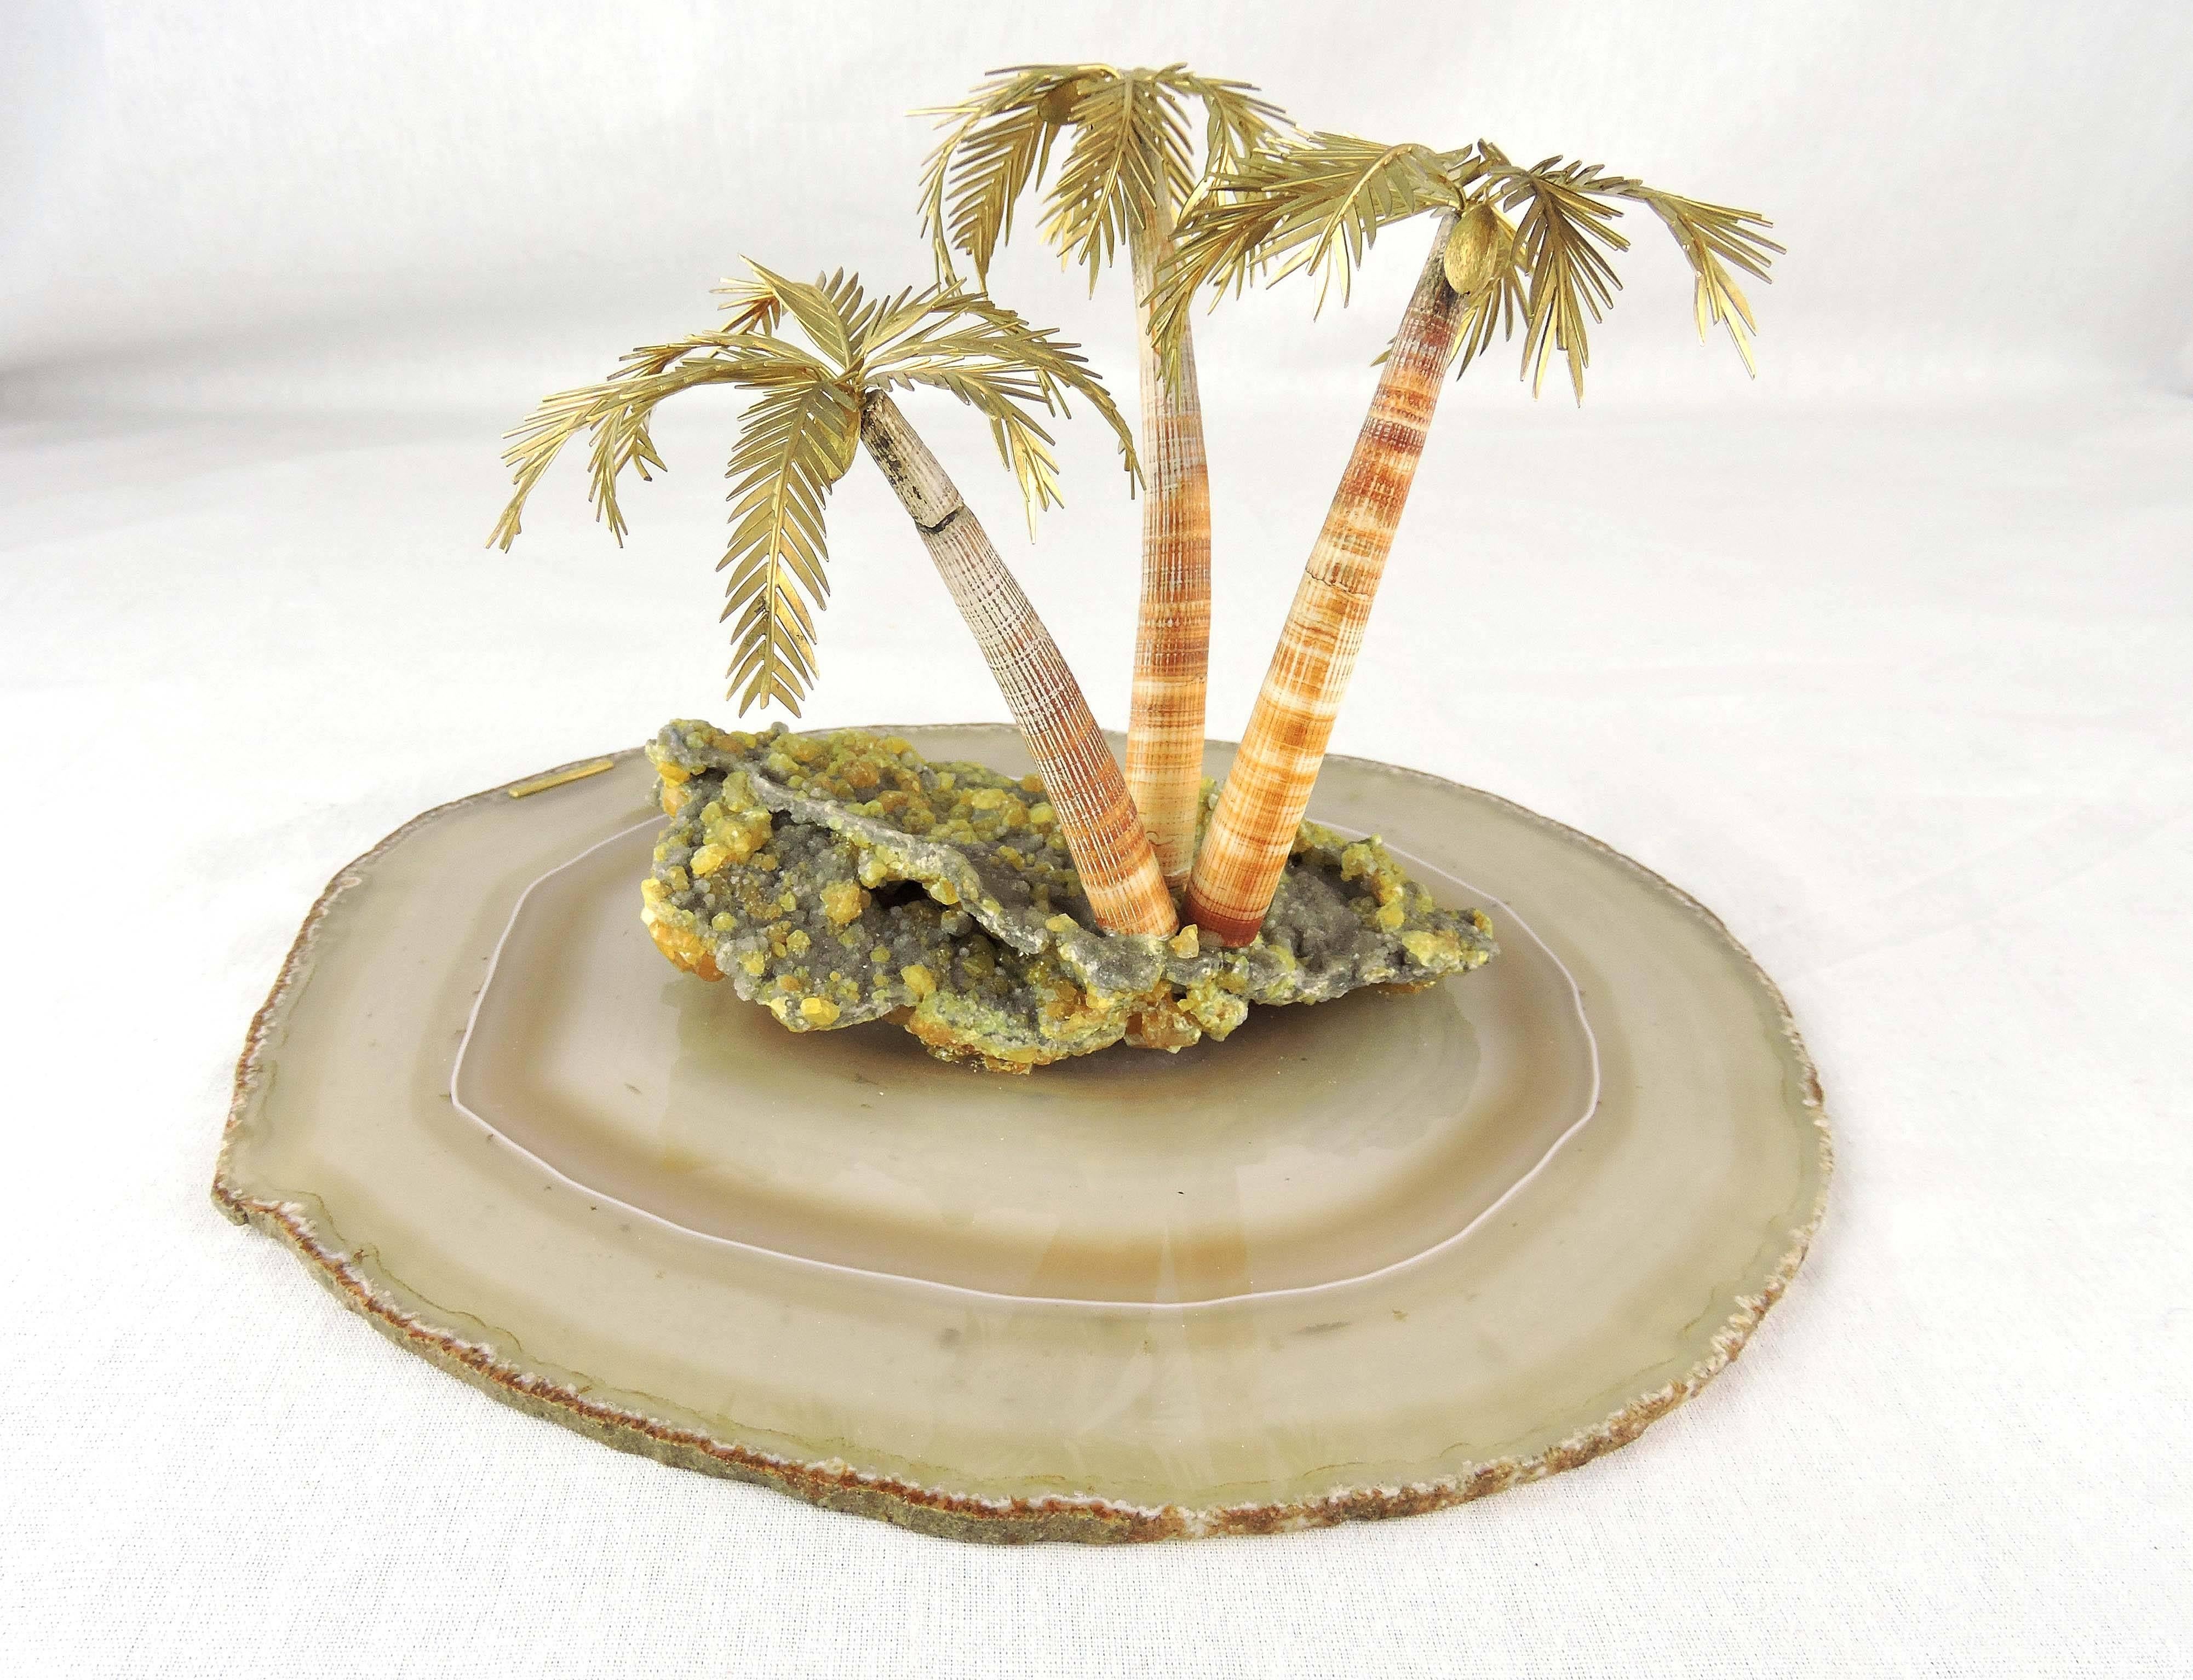 This exquisite and whimsical tropical paradise is a creation of the internationally celebrated Anglo-Italian jeweller, Andrew Grima.

The island consists of three coconut palms with 18-karat gold fruit and foliage weighing approximately 2.5 oz